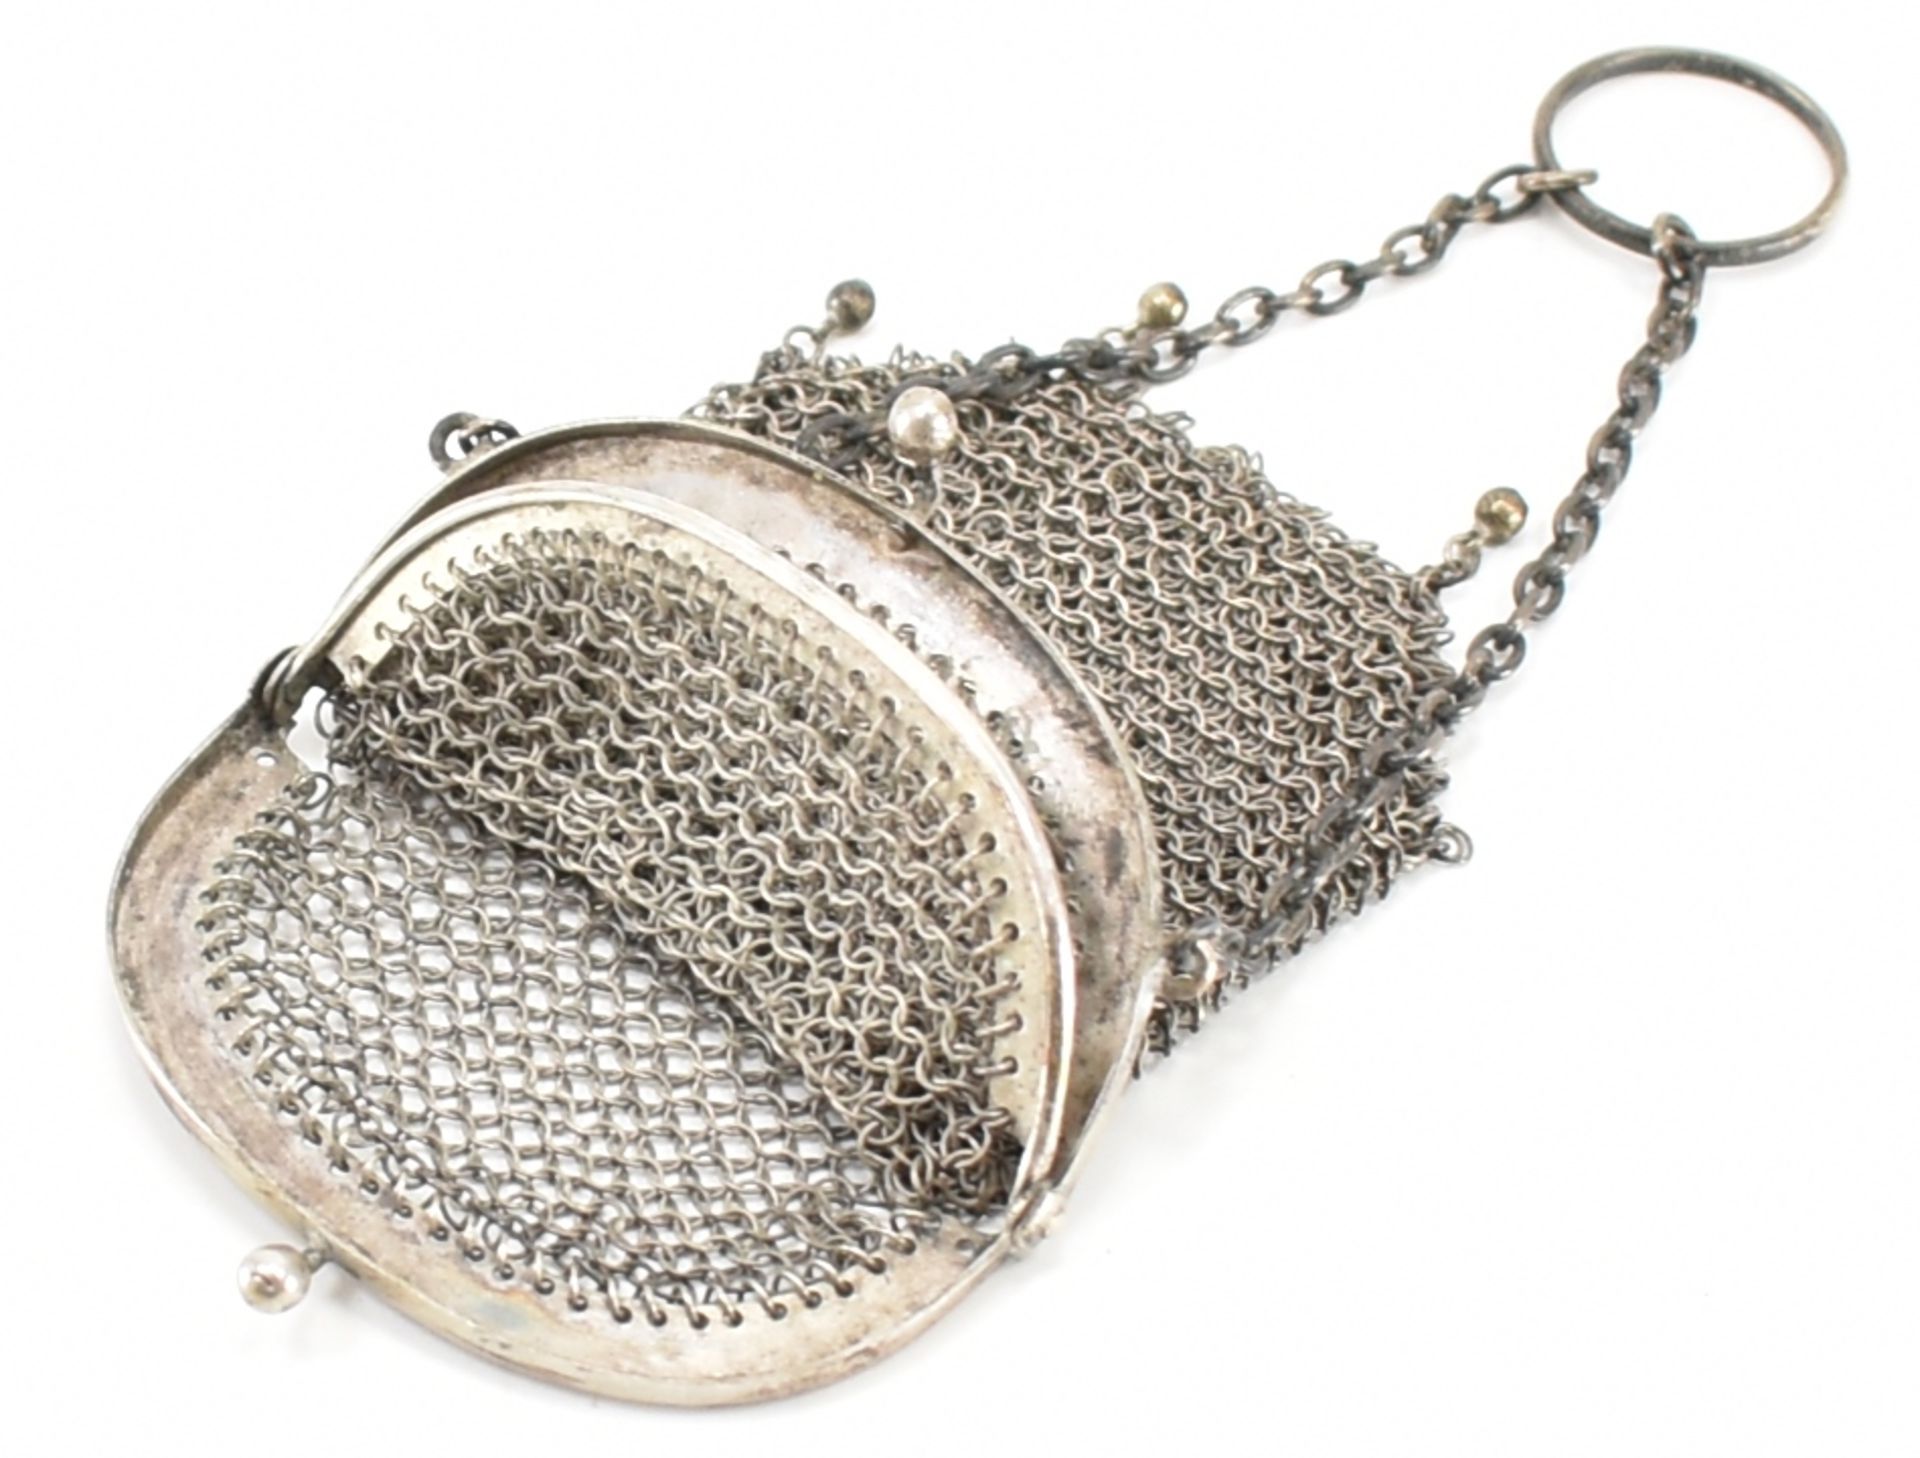 SILVER WHITE METAL CHAINMAIL PURSE - Image 3 of 4